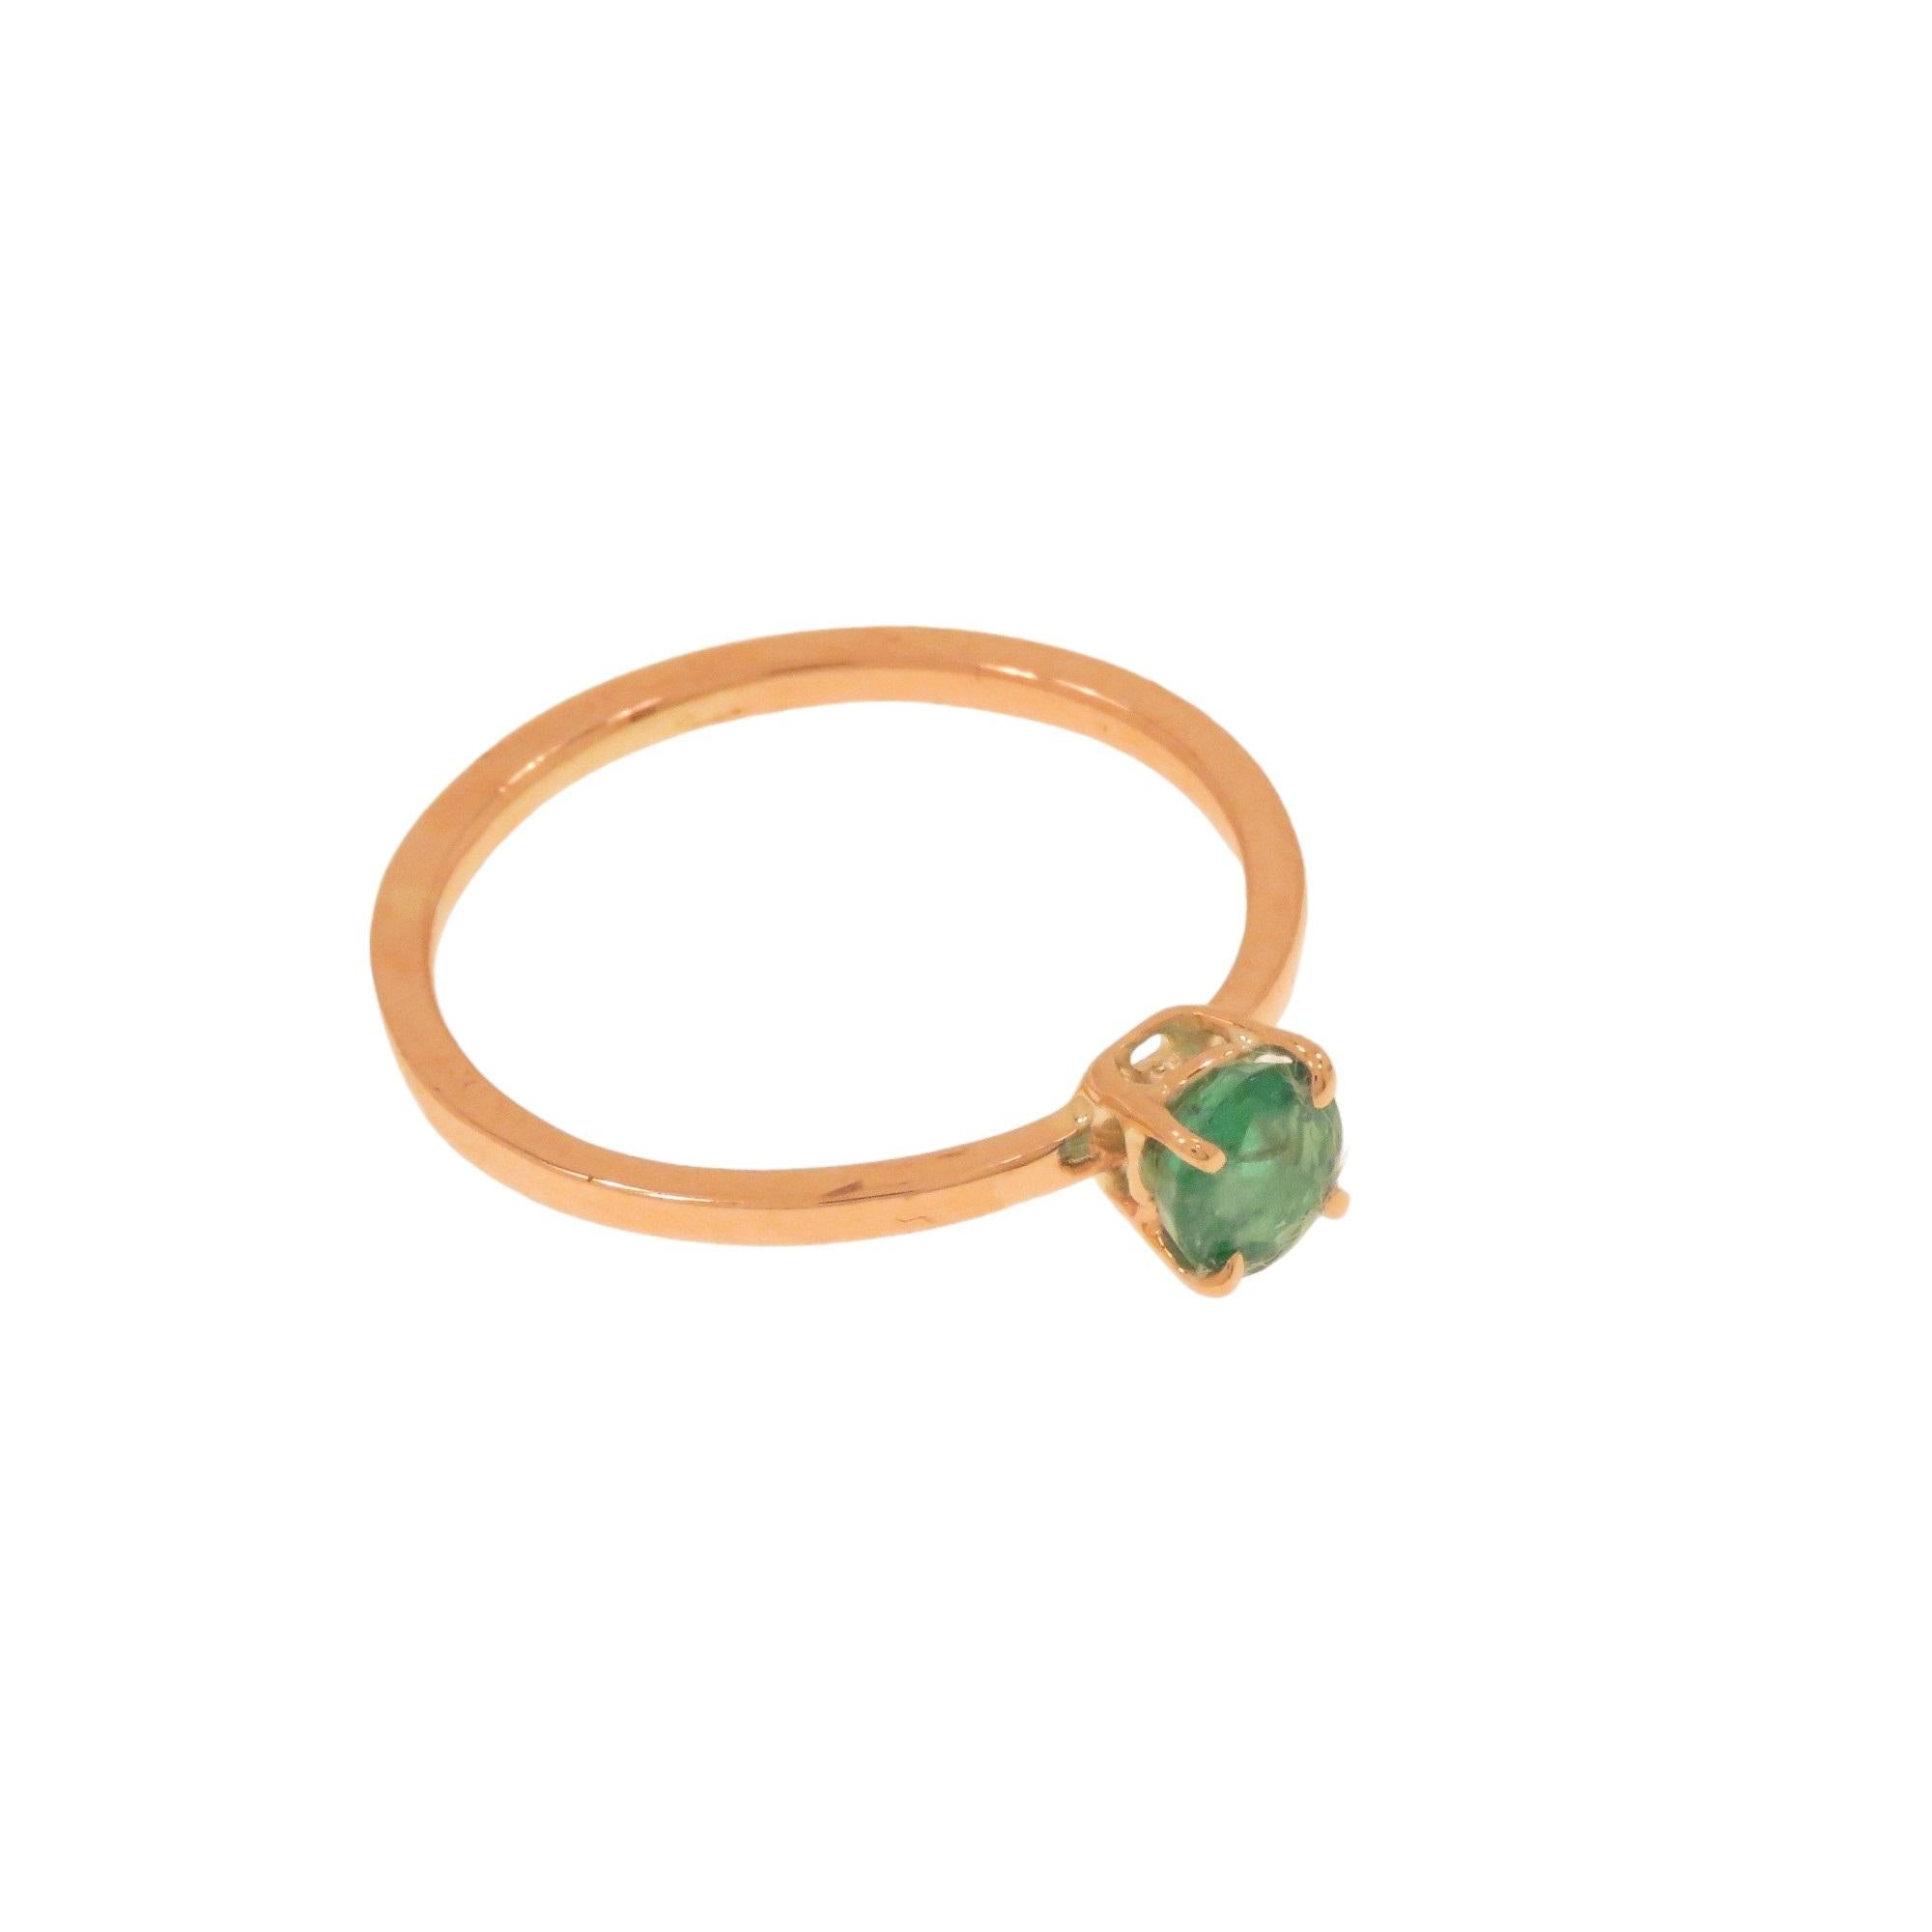 Botta jewelry rose gold emerald ring made in Italy In New Condition For Sale In Milano, IT